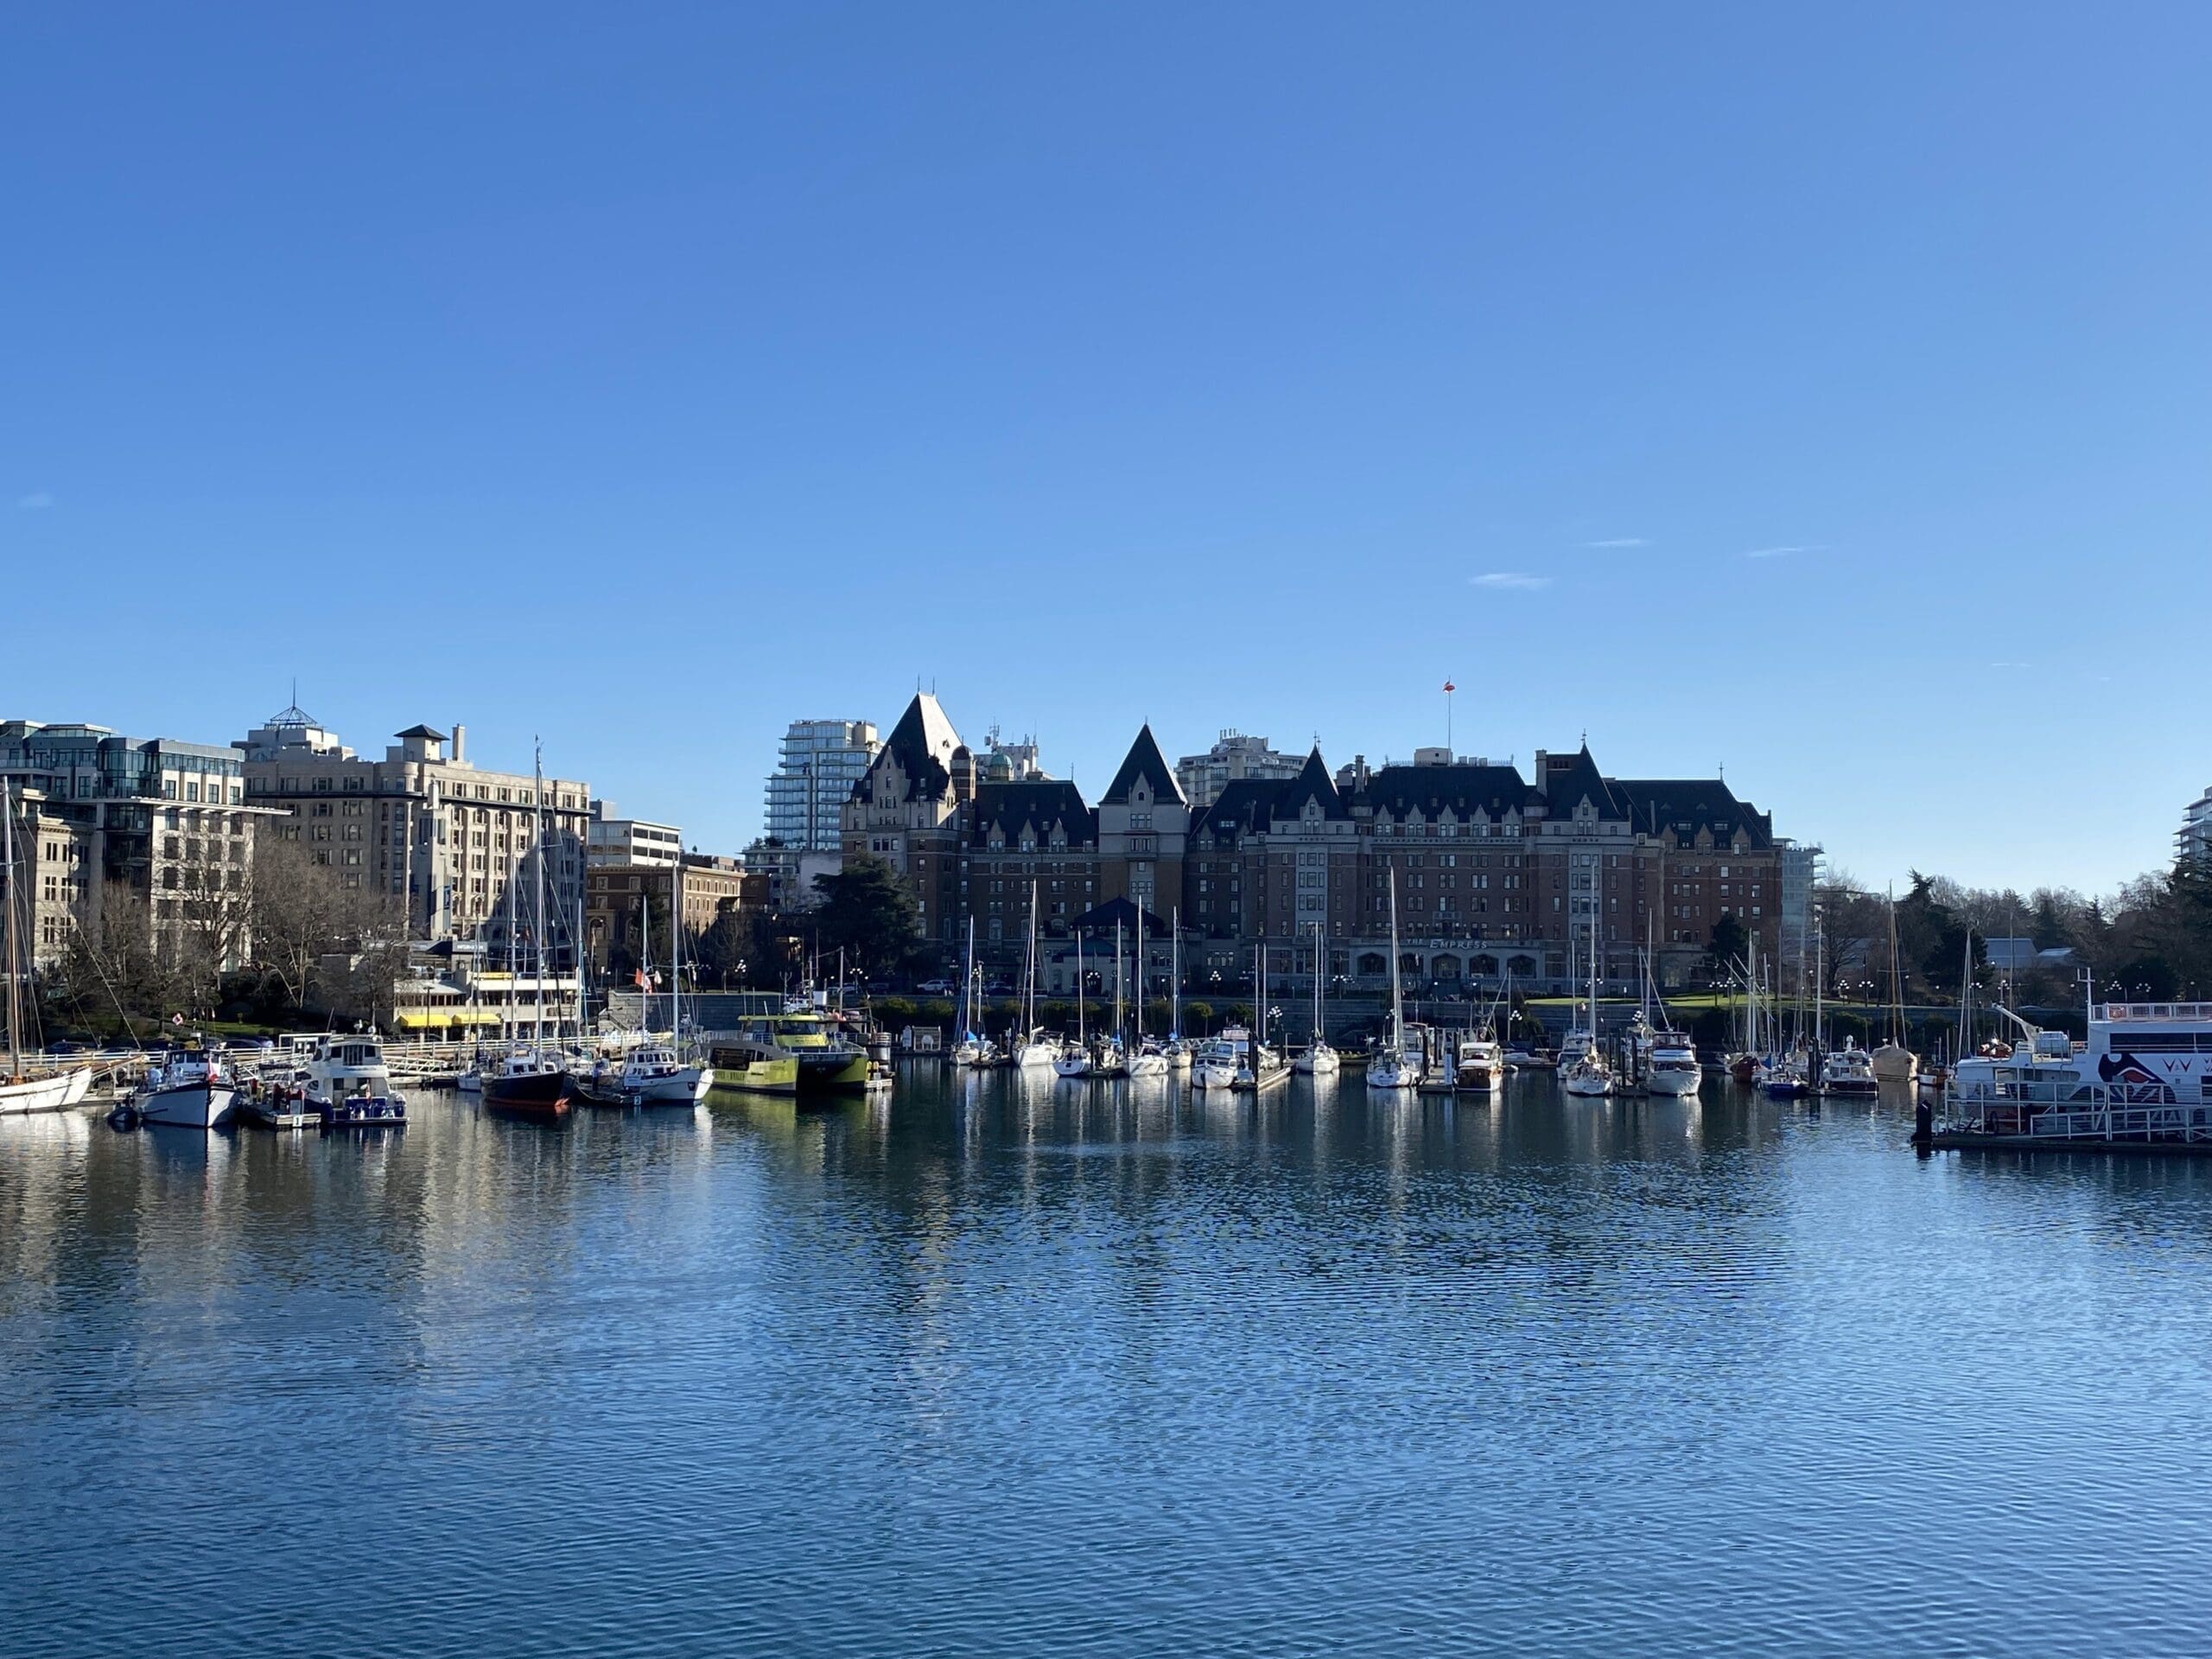 The beautiful Victoria BC Harbour with the Empress Hotel in front. Another place where a top bucket list activity, high tea or afternoon tea at the Empress can be found.